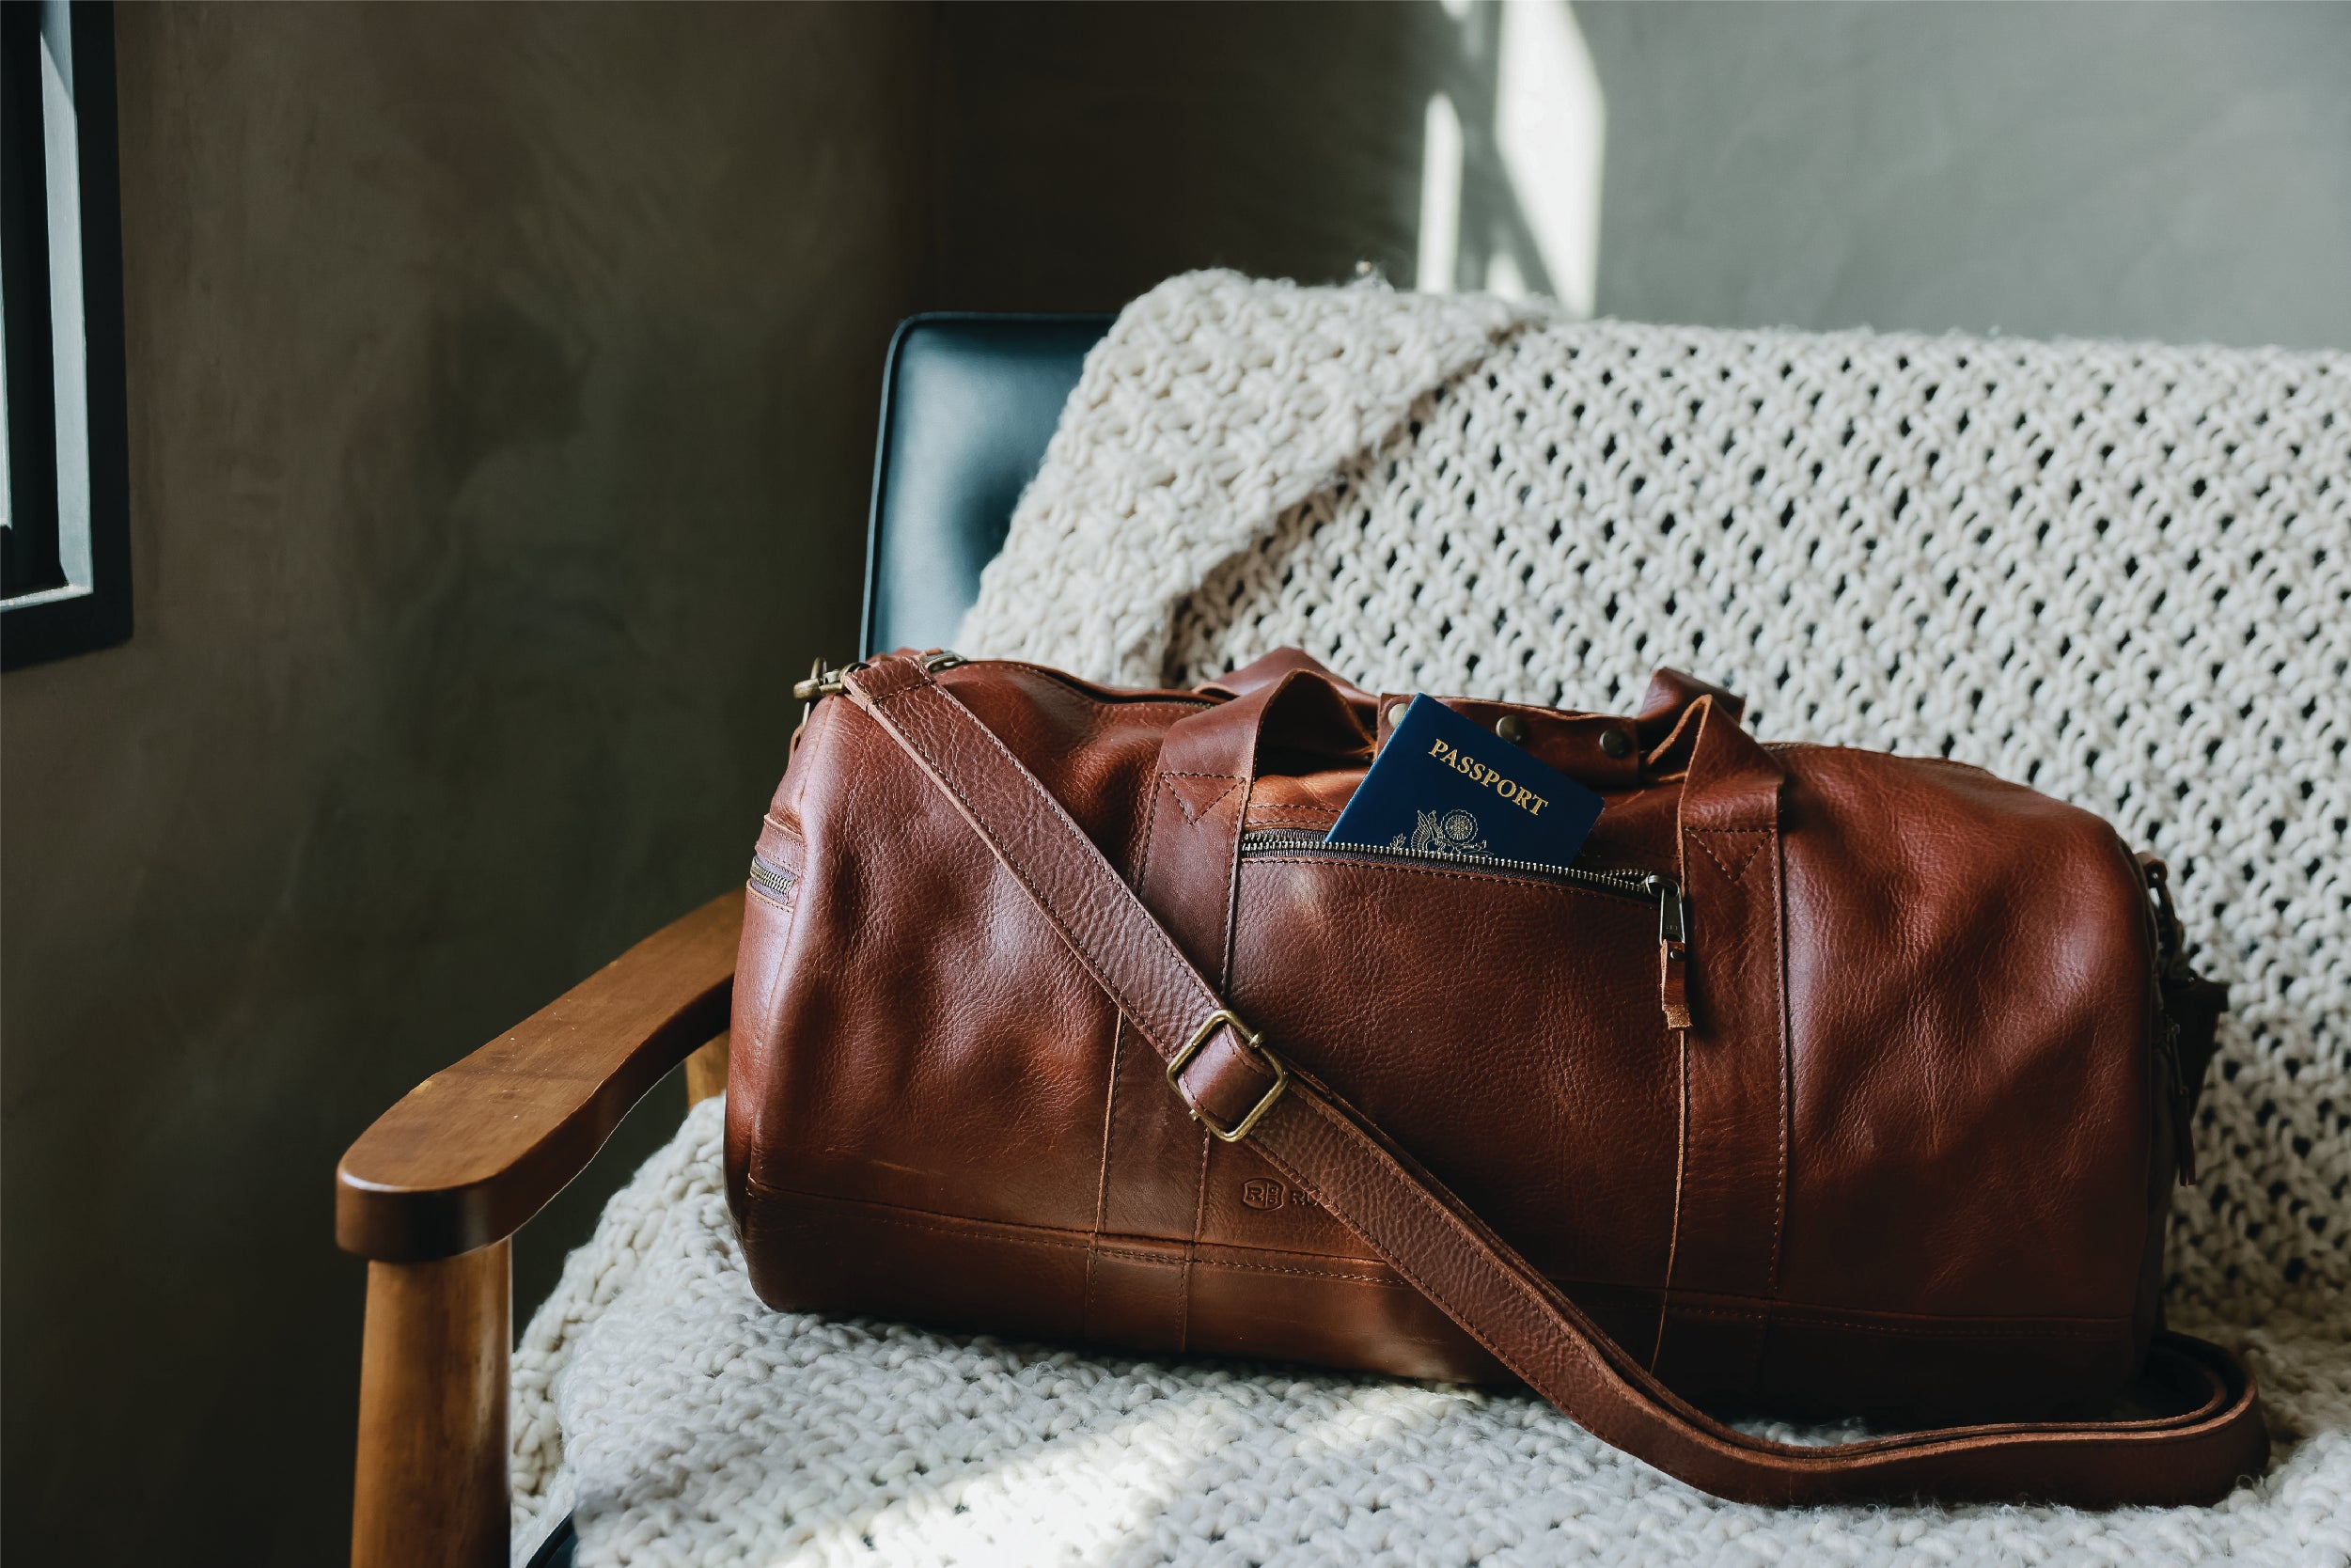 Handmade Leather Goods, Accessories, And Rustic Gear | Rustico